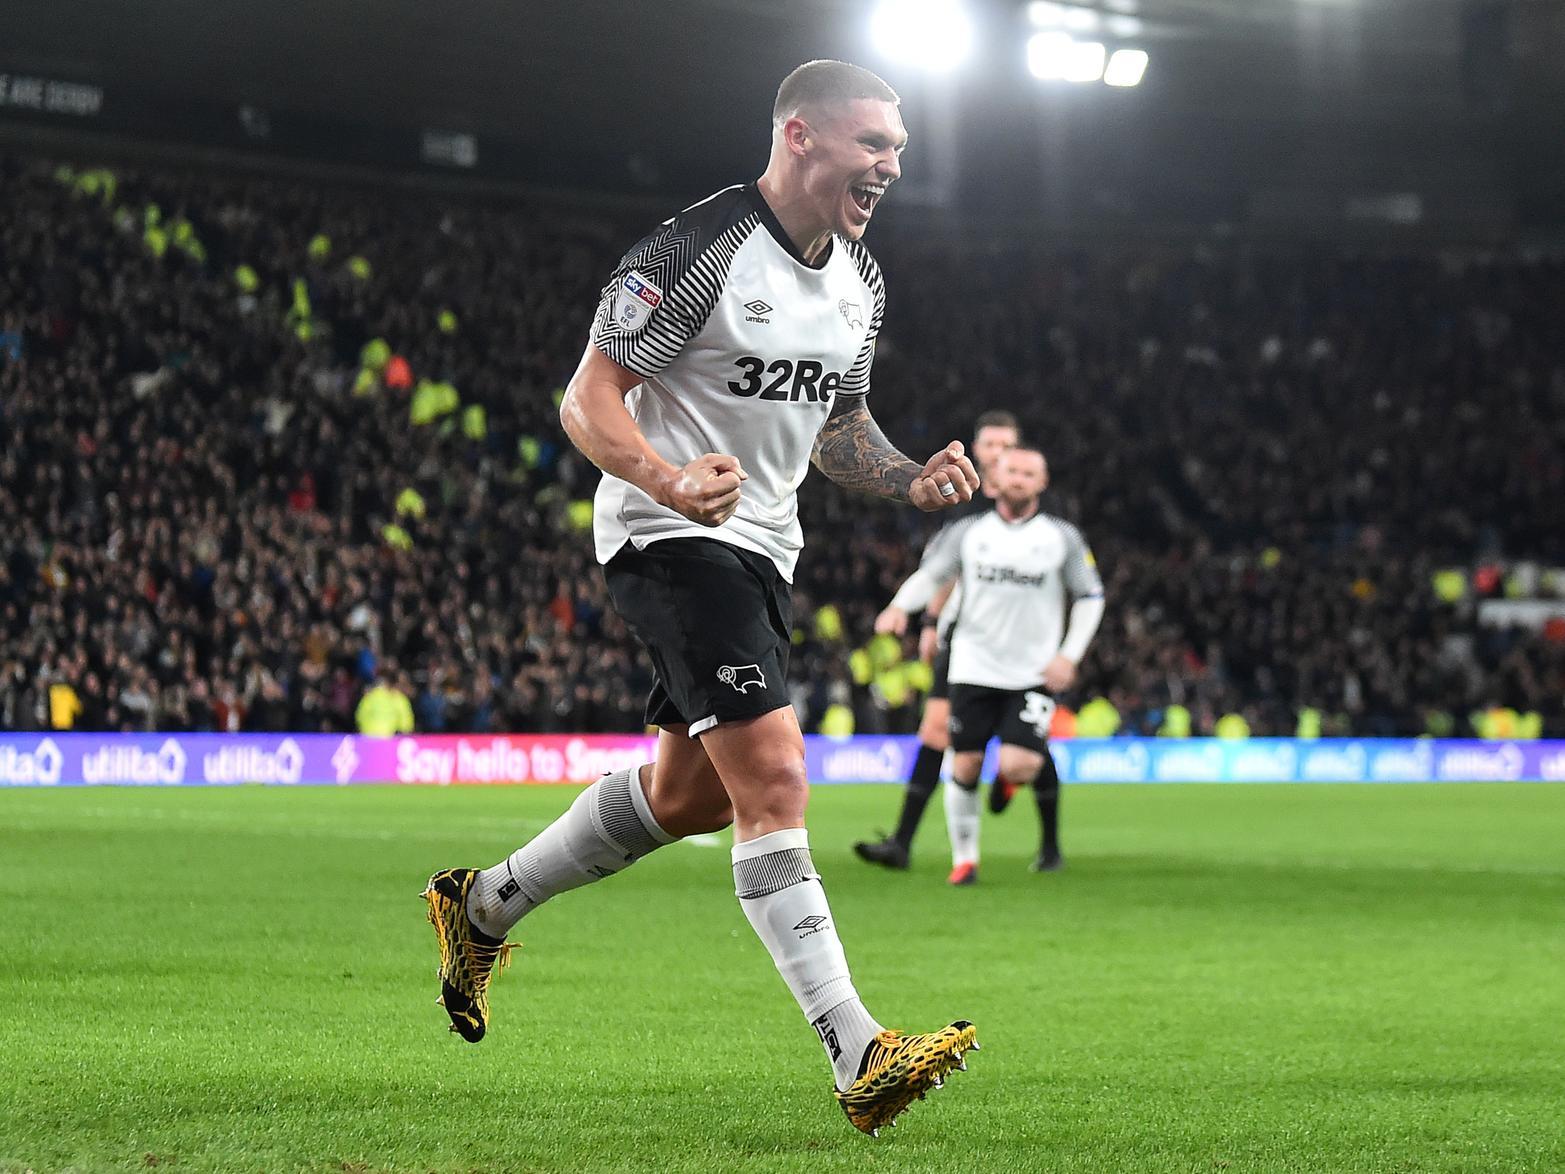 Derby County striker Martyn Waghorn has claimed that his side "can beat anyone" on their day, and that they'll be looking to use their strong home form to their advantage against Fulham this evening. (Club official website)